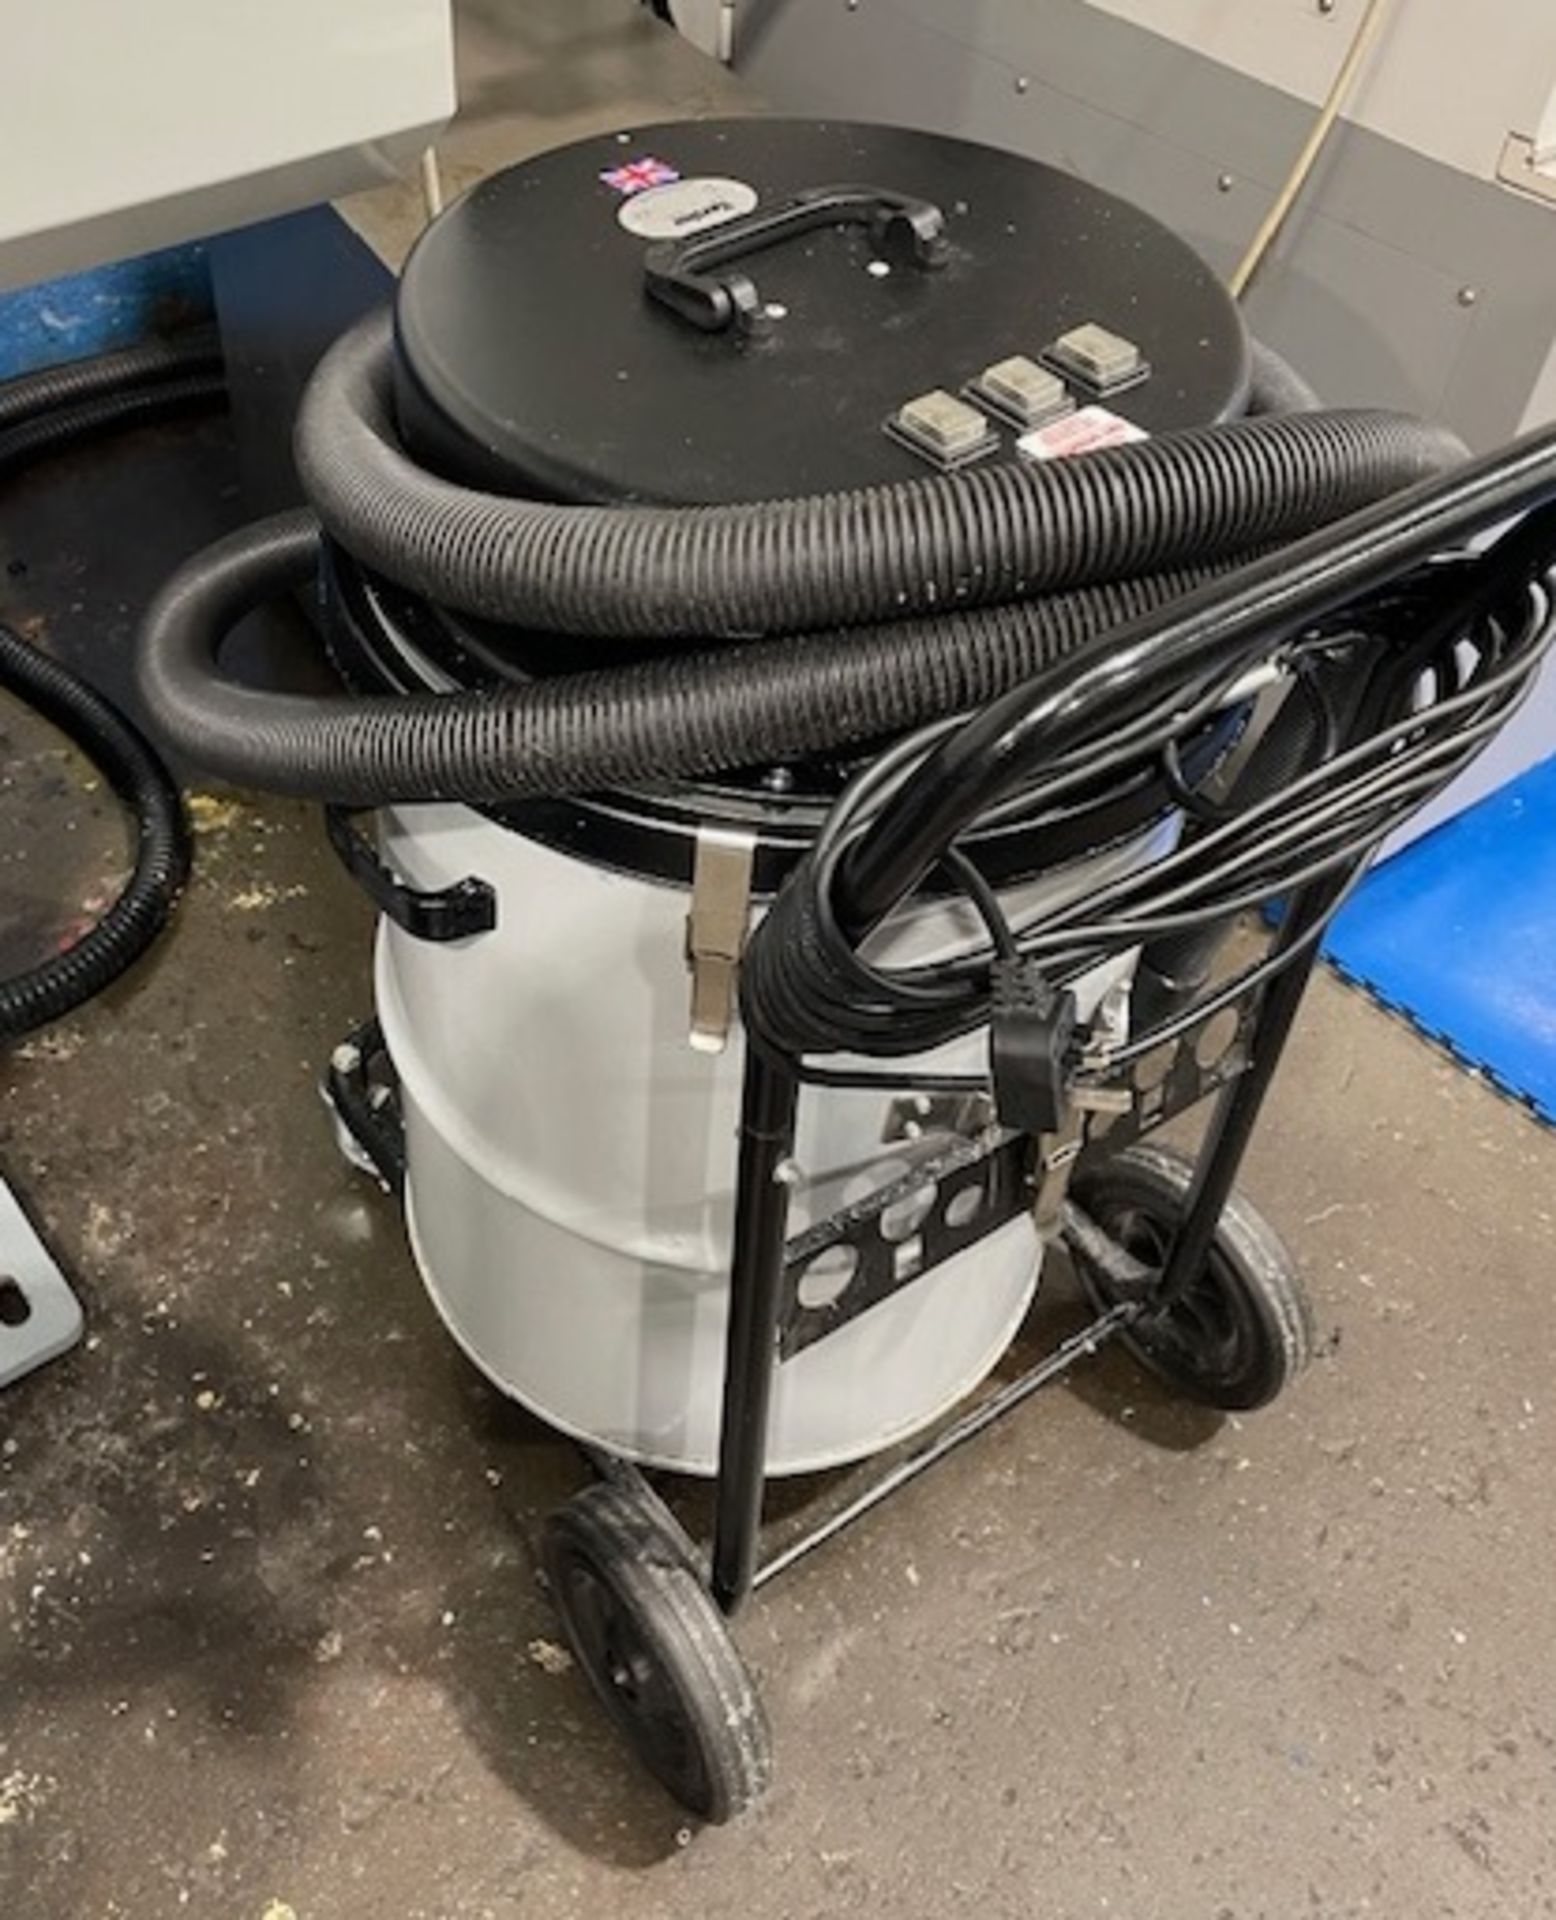 Kerstar Mobile Cylinder Vacuum Cleaner (Location: Earls Barton. Please Refer to General Notes)